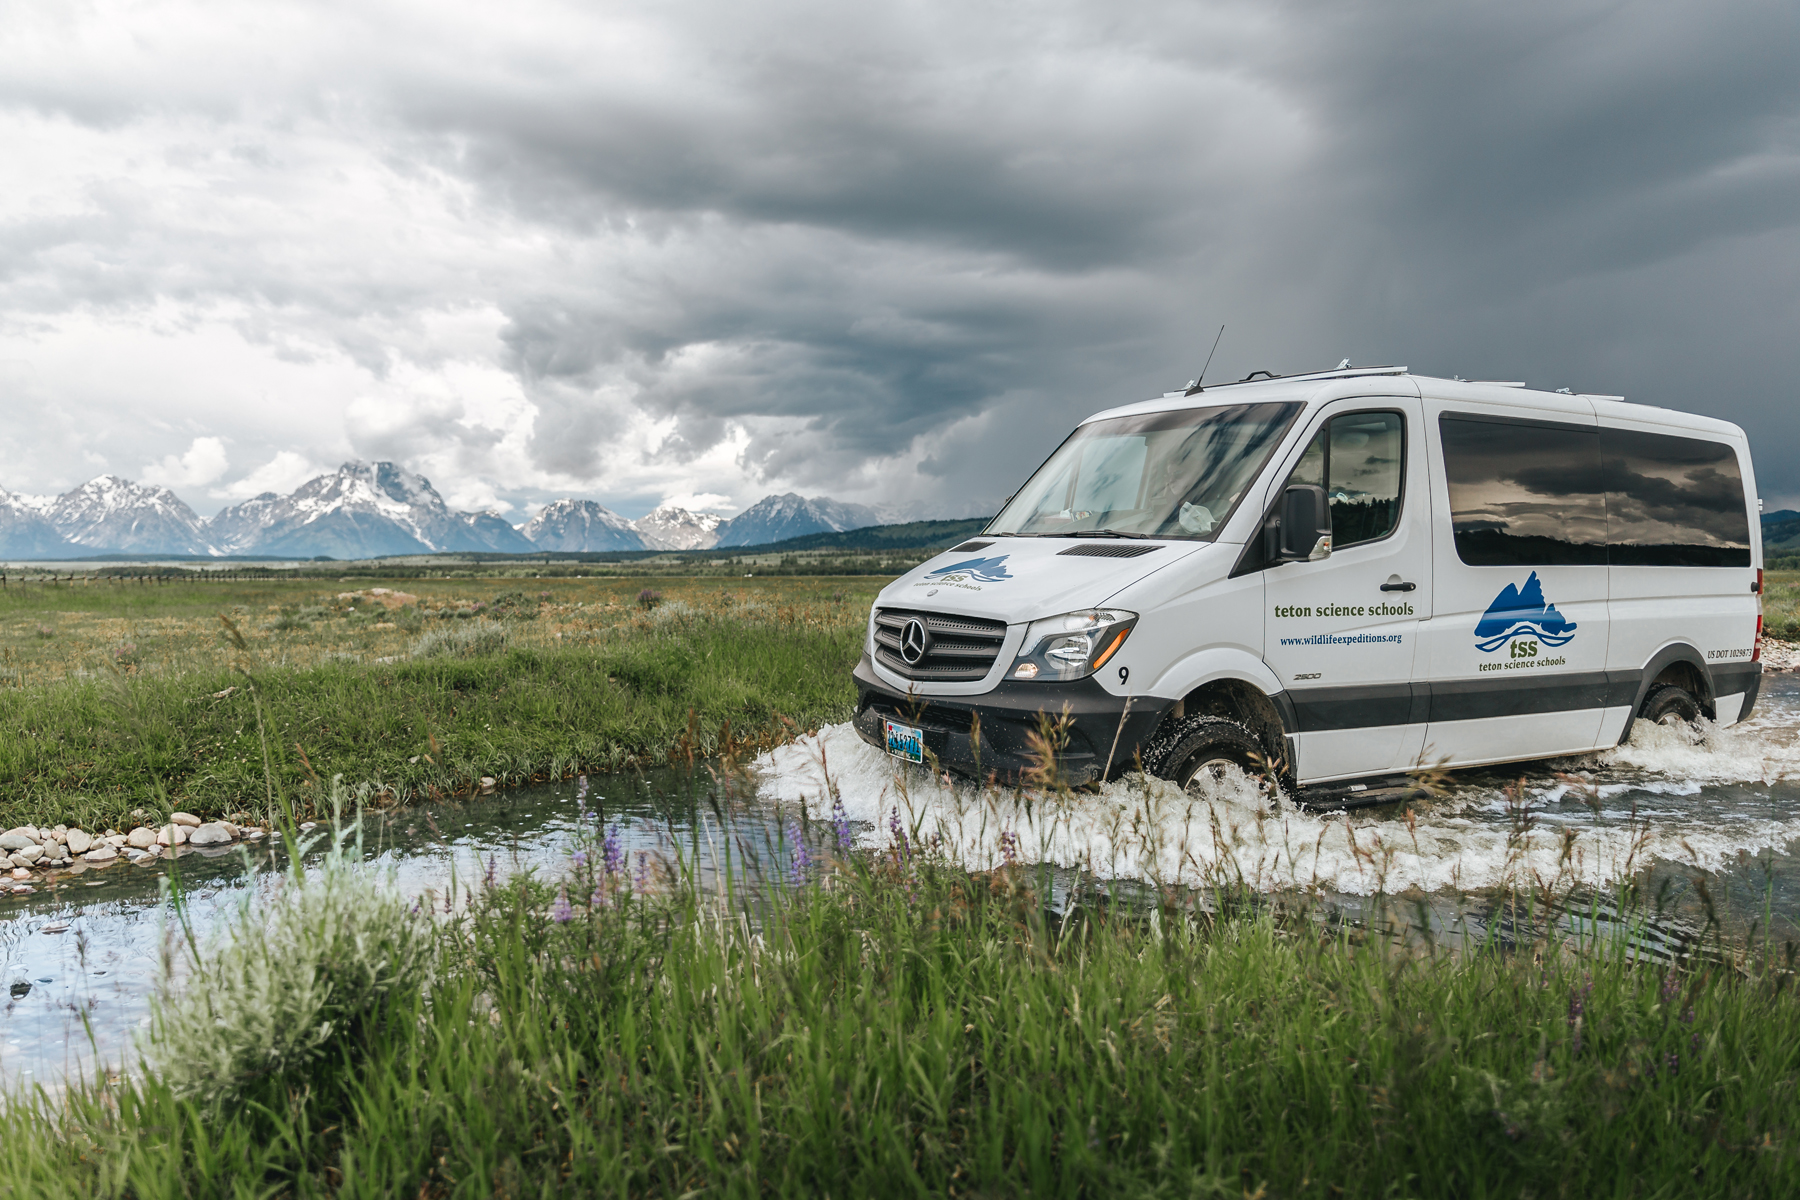 Traveling via Mercedes-Benz Sprinter custom safari vehicles, Wildlife Expeditions guests explore Yellowstone in style, popping open the roof hatch for spectacular views (photo by Orijin Media).